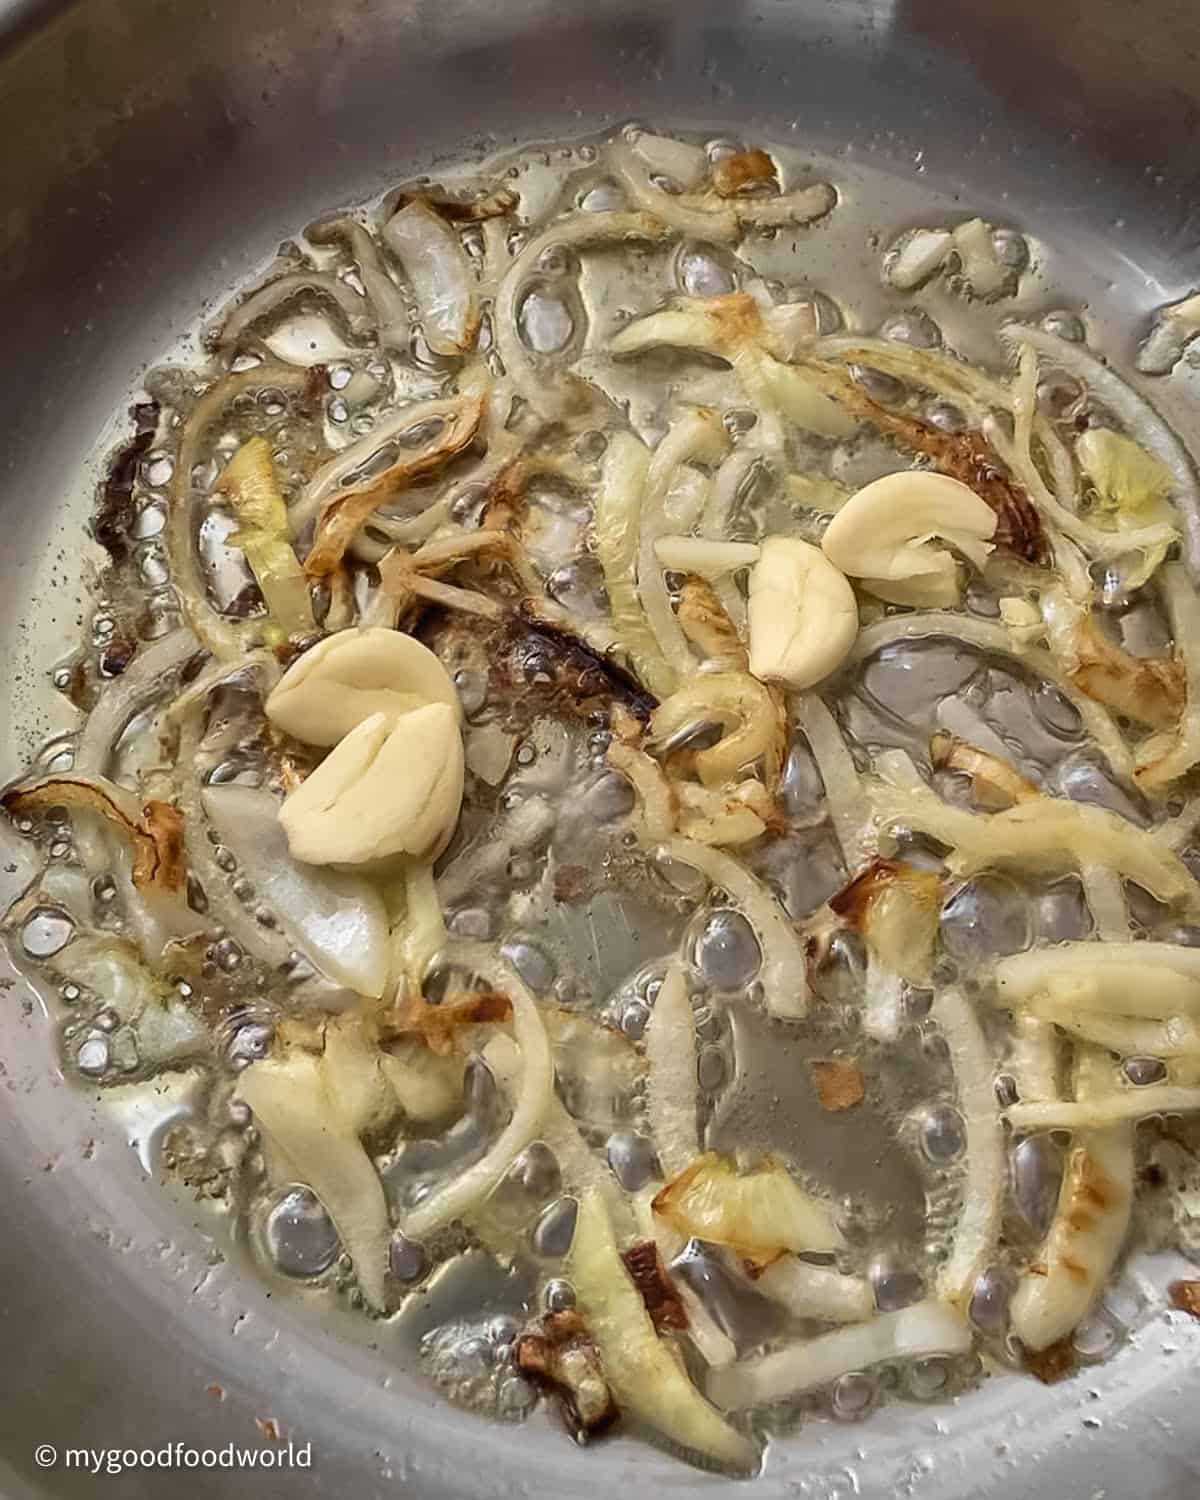 Slices of onions frying in butter until they are golden brown in color. Some smashed garlic pods are added to the caramelizing onions.